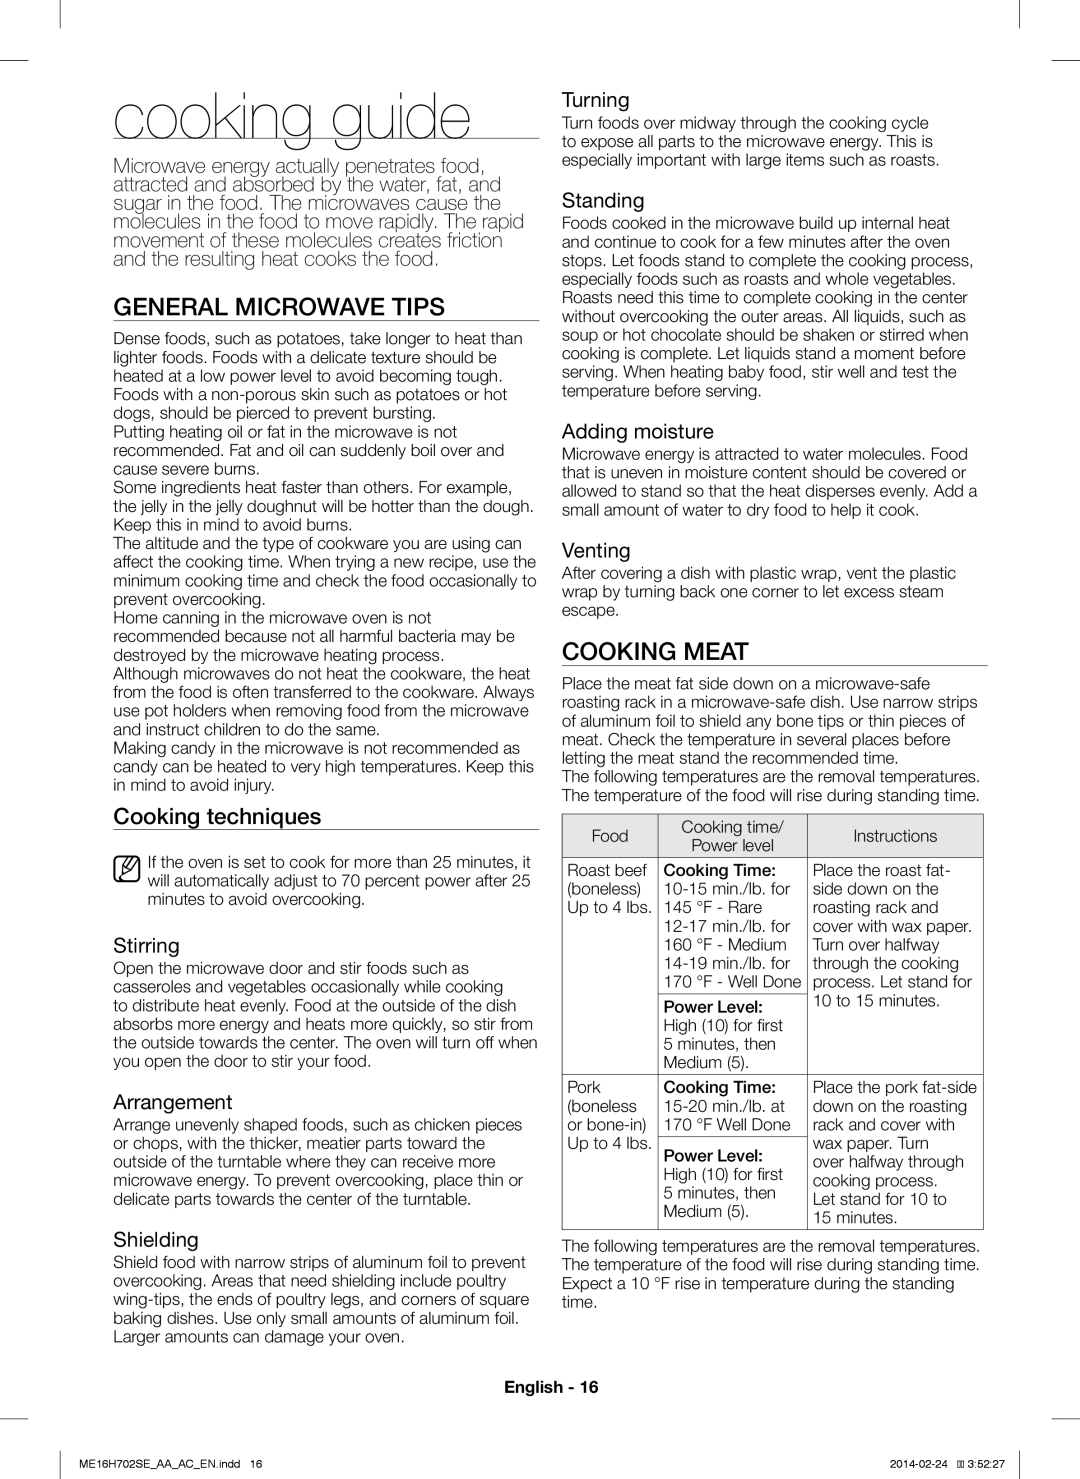 Samsung ME16H702SE user manual cooking guide, General Microwave Tips, Cooking Meat, Cooking techniques, English 